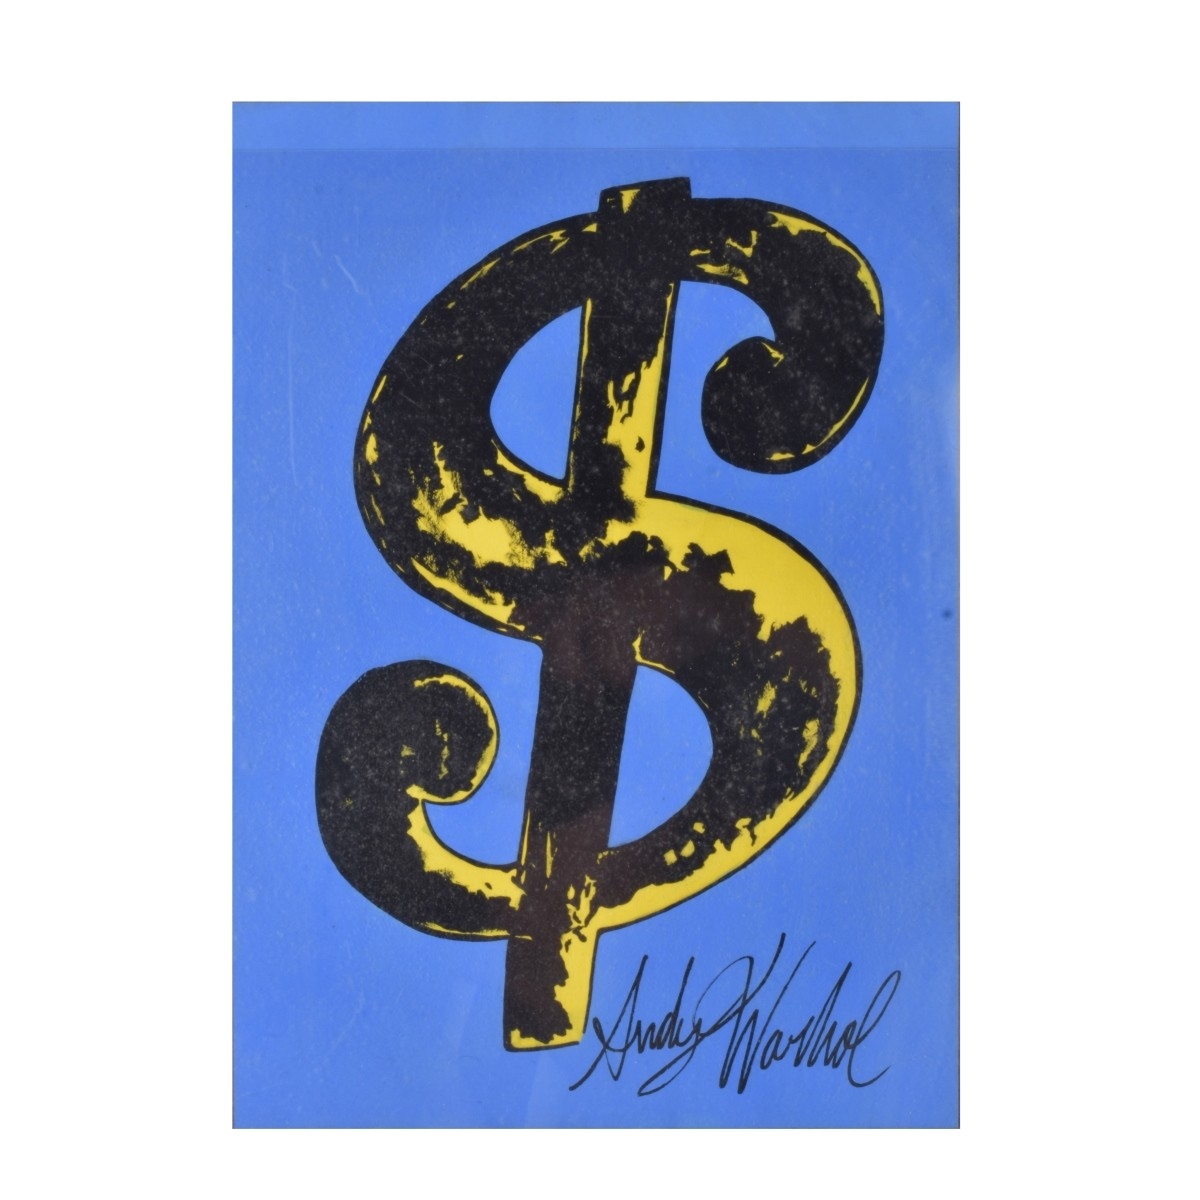 Dollar Signed by Andy Warhol